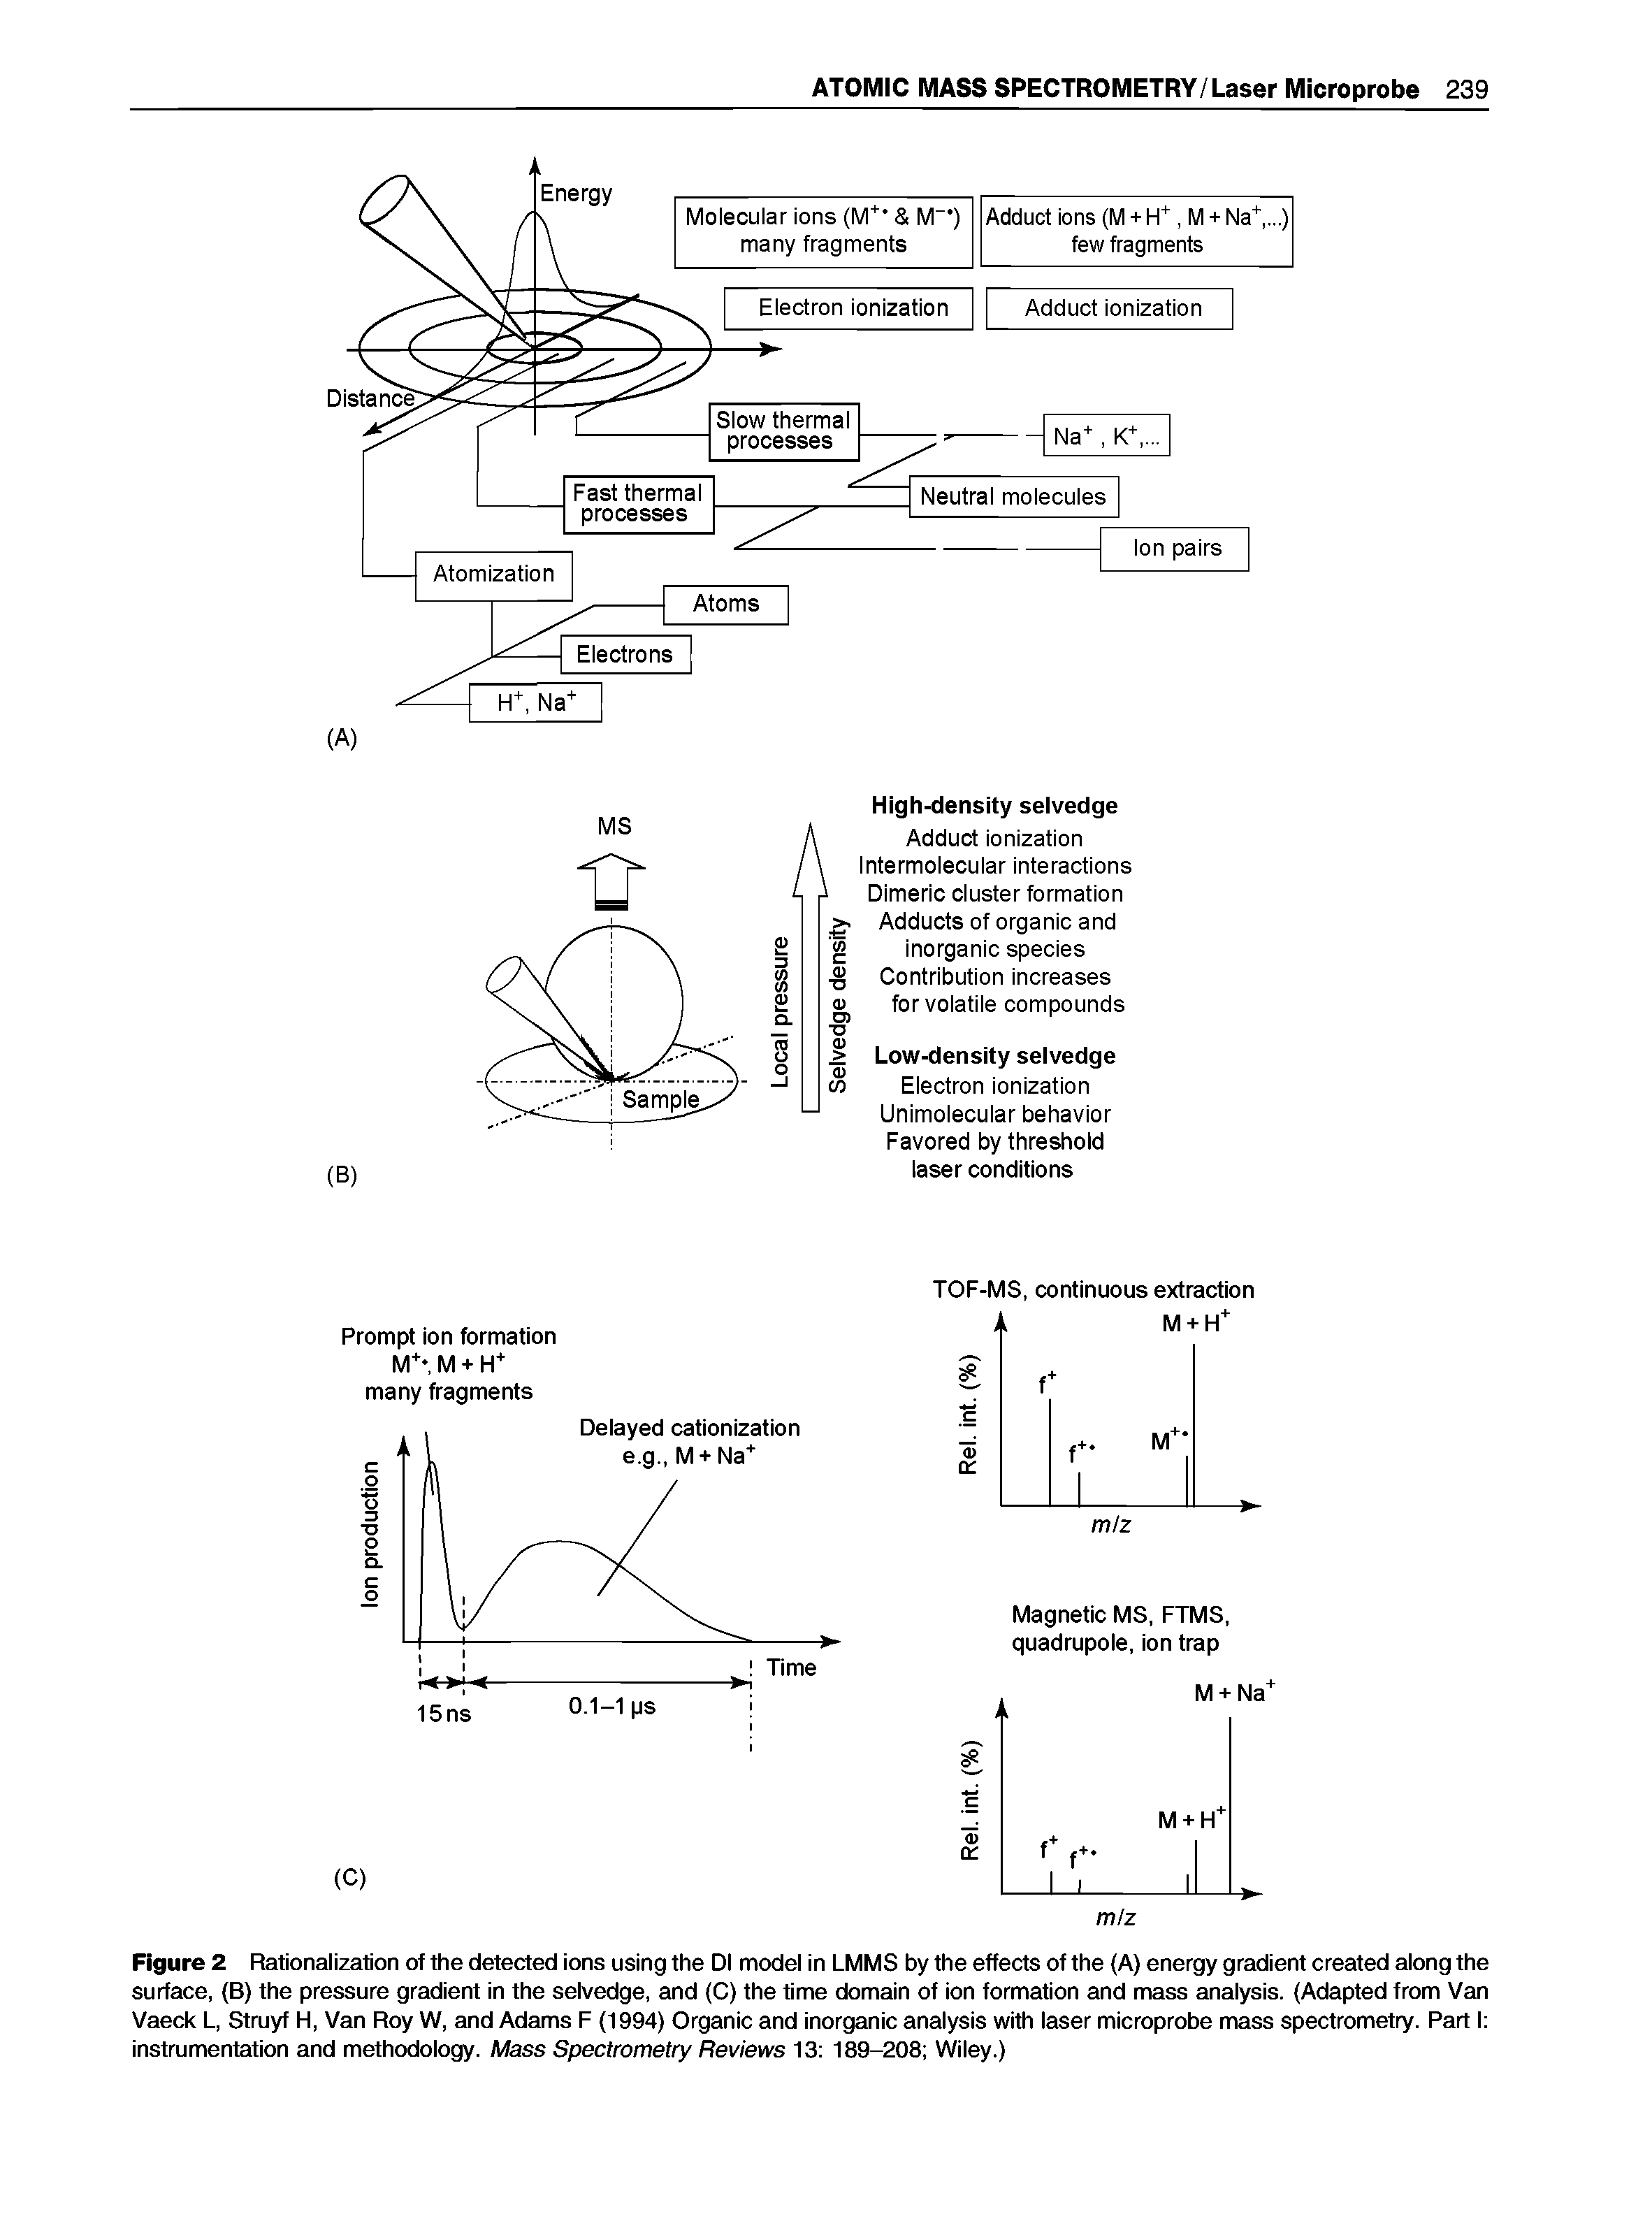 Figure 2 Rationalization of the detected ions using the Dl model in LMMS by the effects of the (A) energy gradient created along the surface, (B) the pressure gradient in the selvedge, and (C) the time domain of ion formation and mass analysis. (Adapted from Van Vaeck L, Struyf H, Van Roy W, and Adams F (1994) Organic and inorganic analysis with laser microprobe mass spectrometry. Part I instrumentation and methodology. Mass Spectrometry Reviews 13 189-208 Wiley.)...